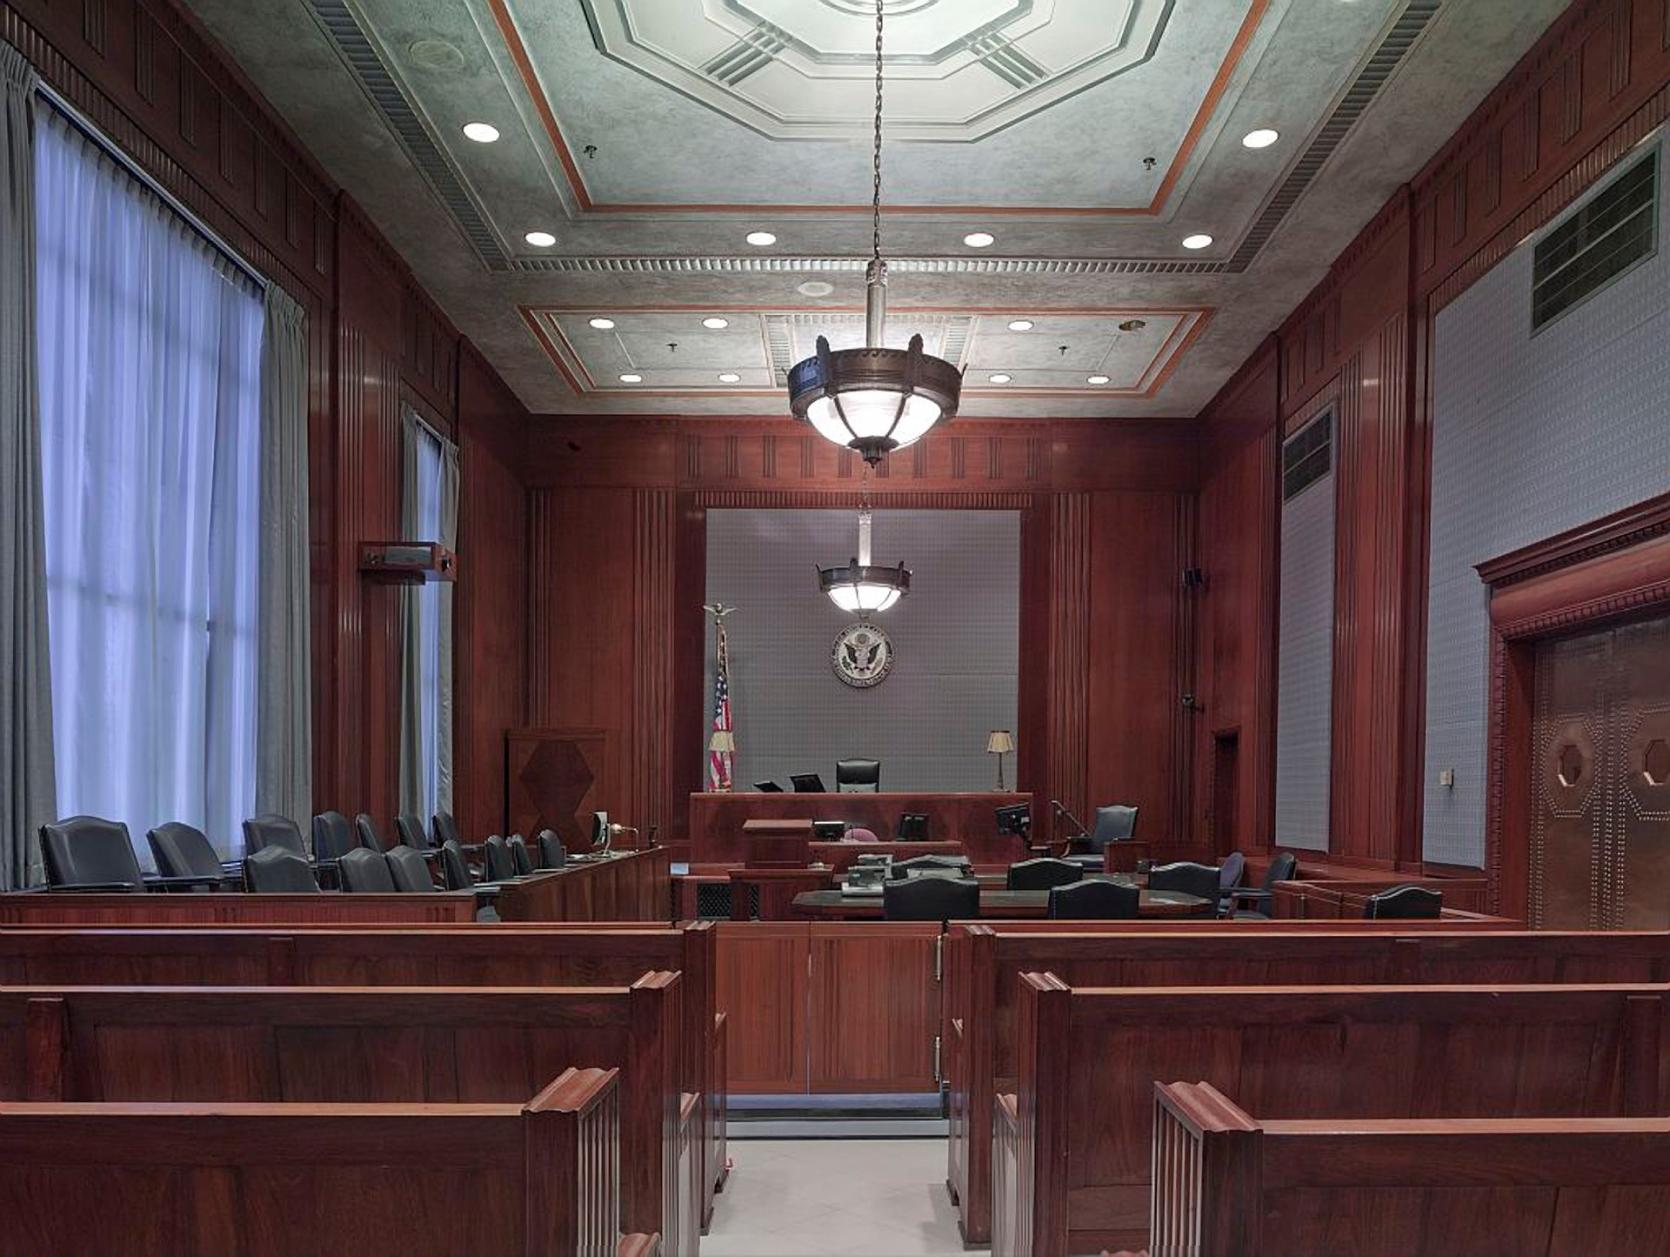 Interior of empty court room with judge's bench at the center